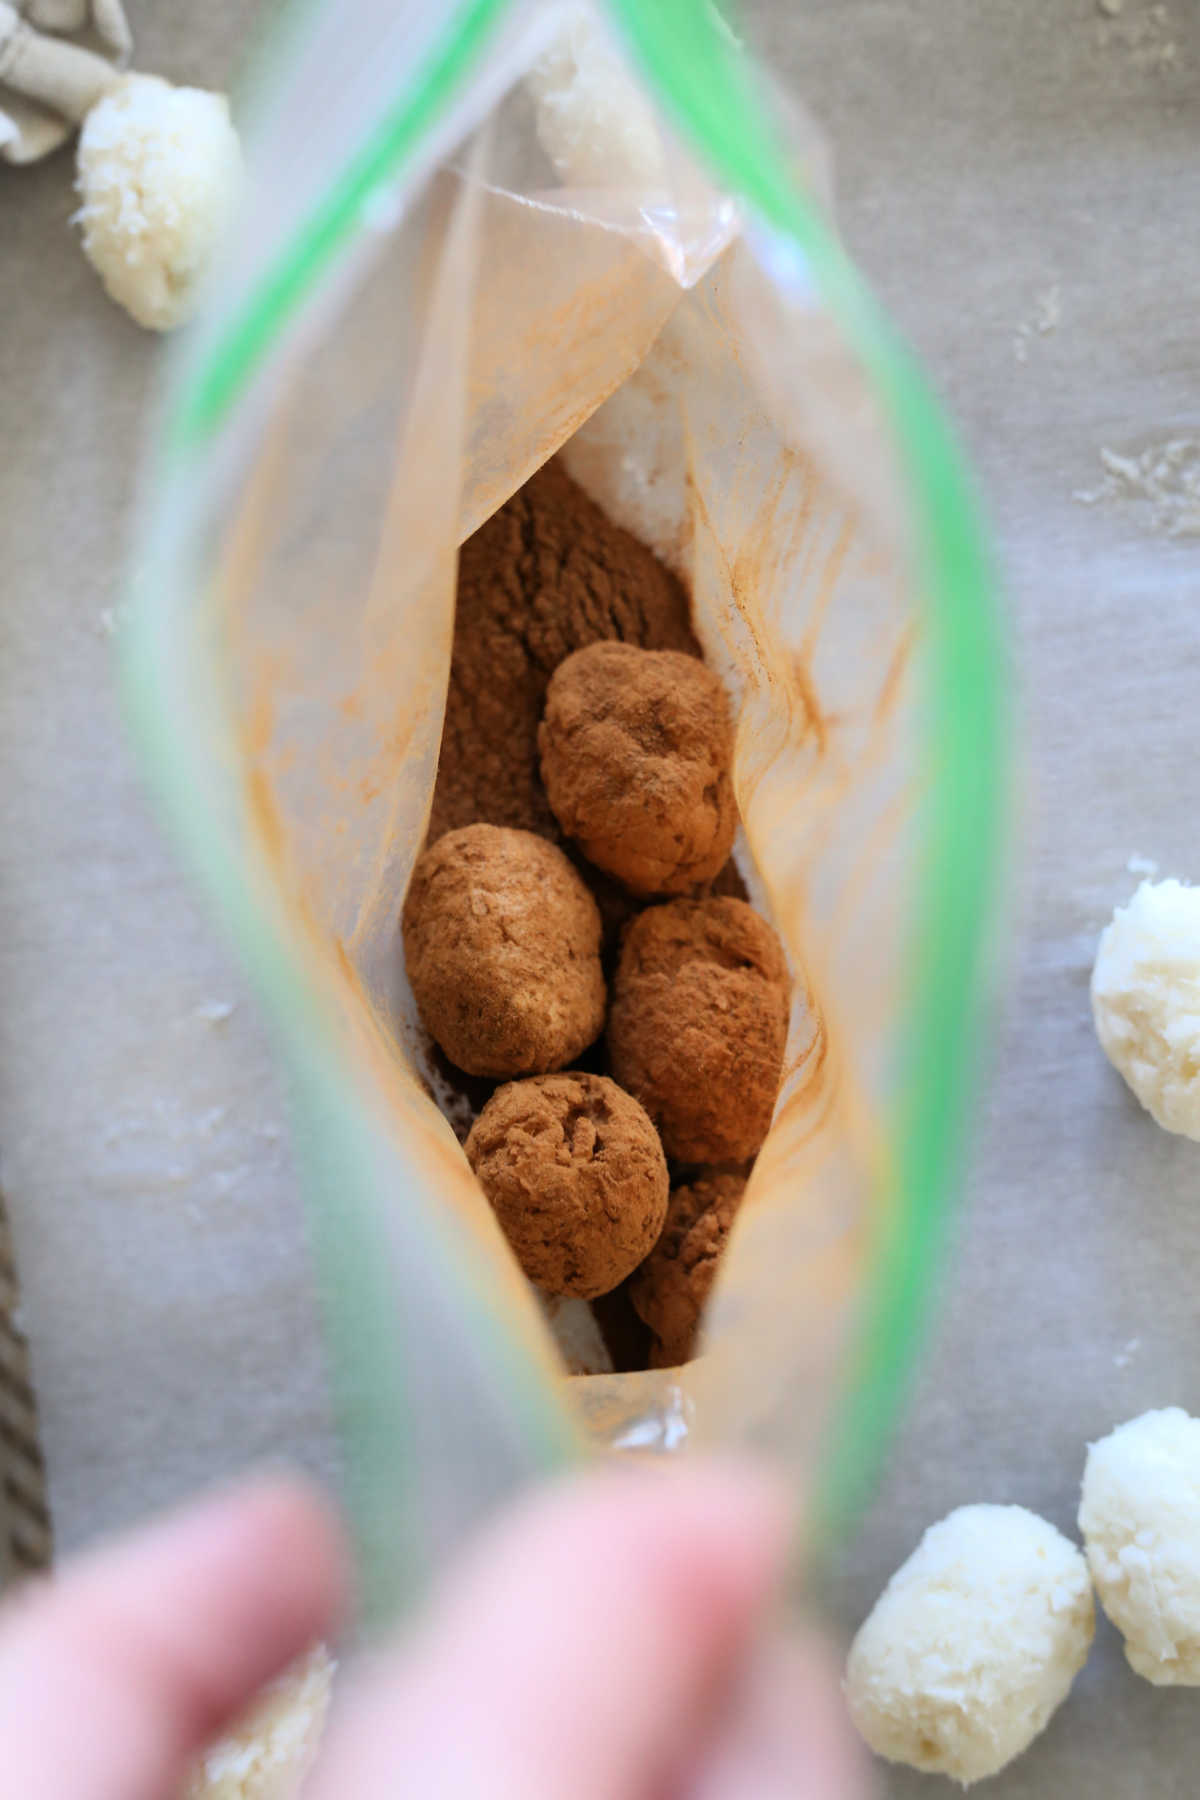 shaking coconut potato balls in a bag filled with cinnamon to make candy